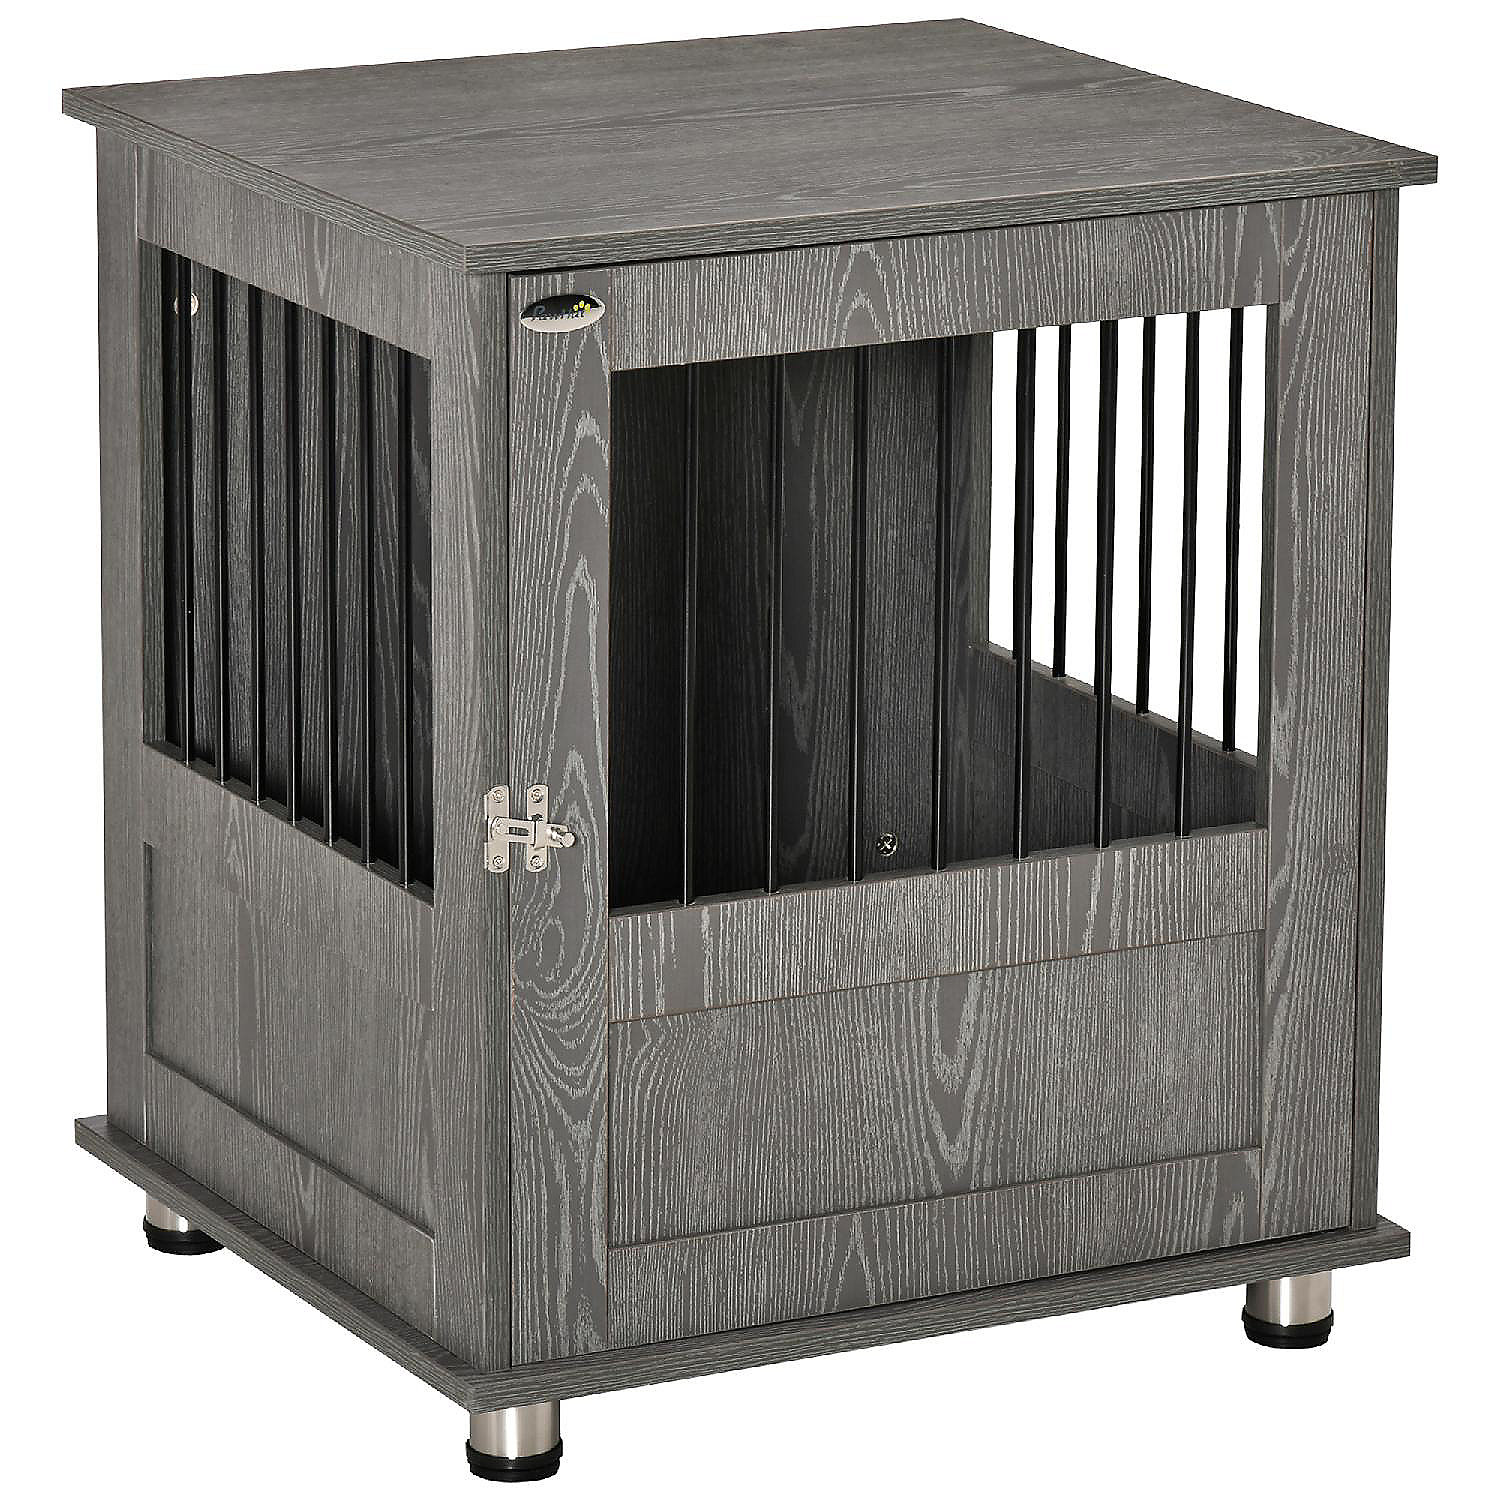 PawHut Furniture Dog Kennel Wooden End Table Small Pet Crate with Magnetic  Door Indoor Crate Animal Cage Grey | Oriental Trading